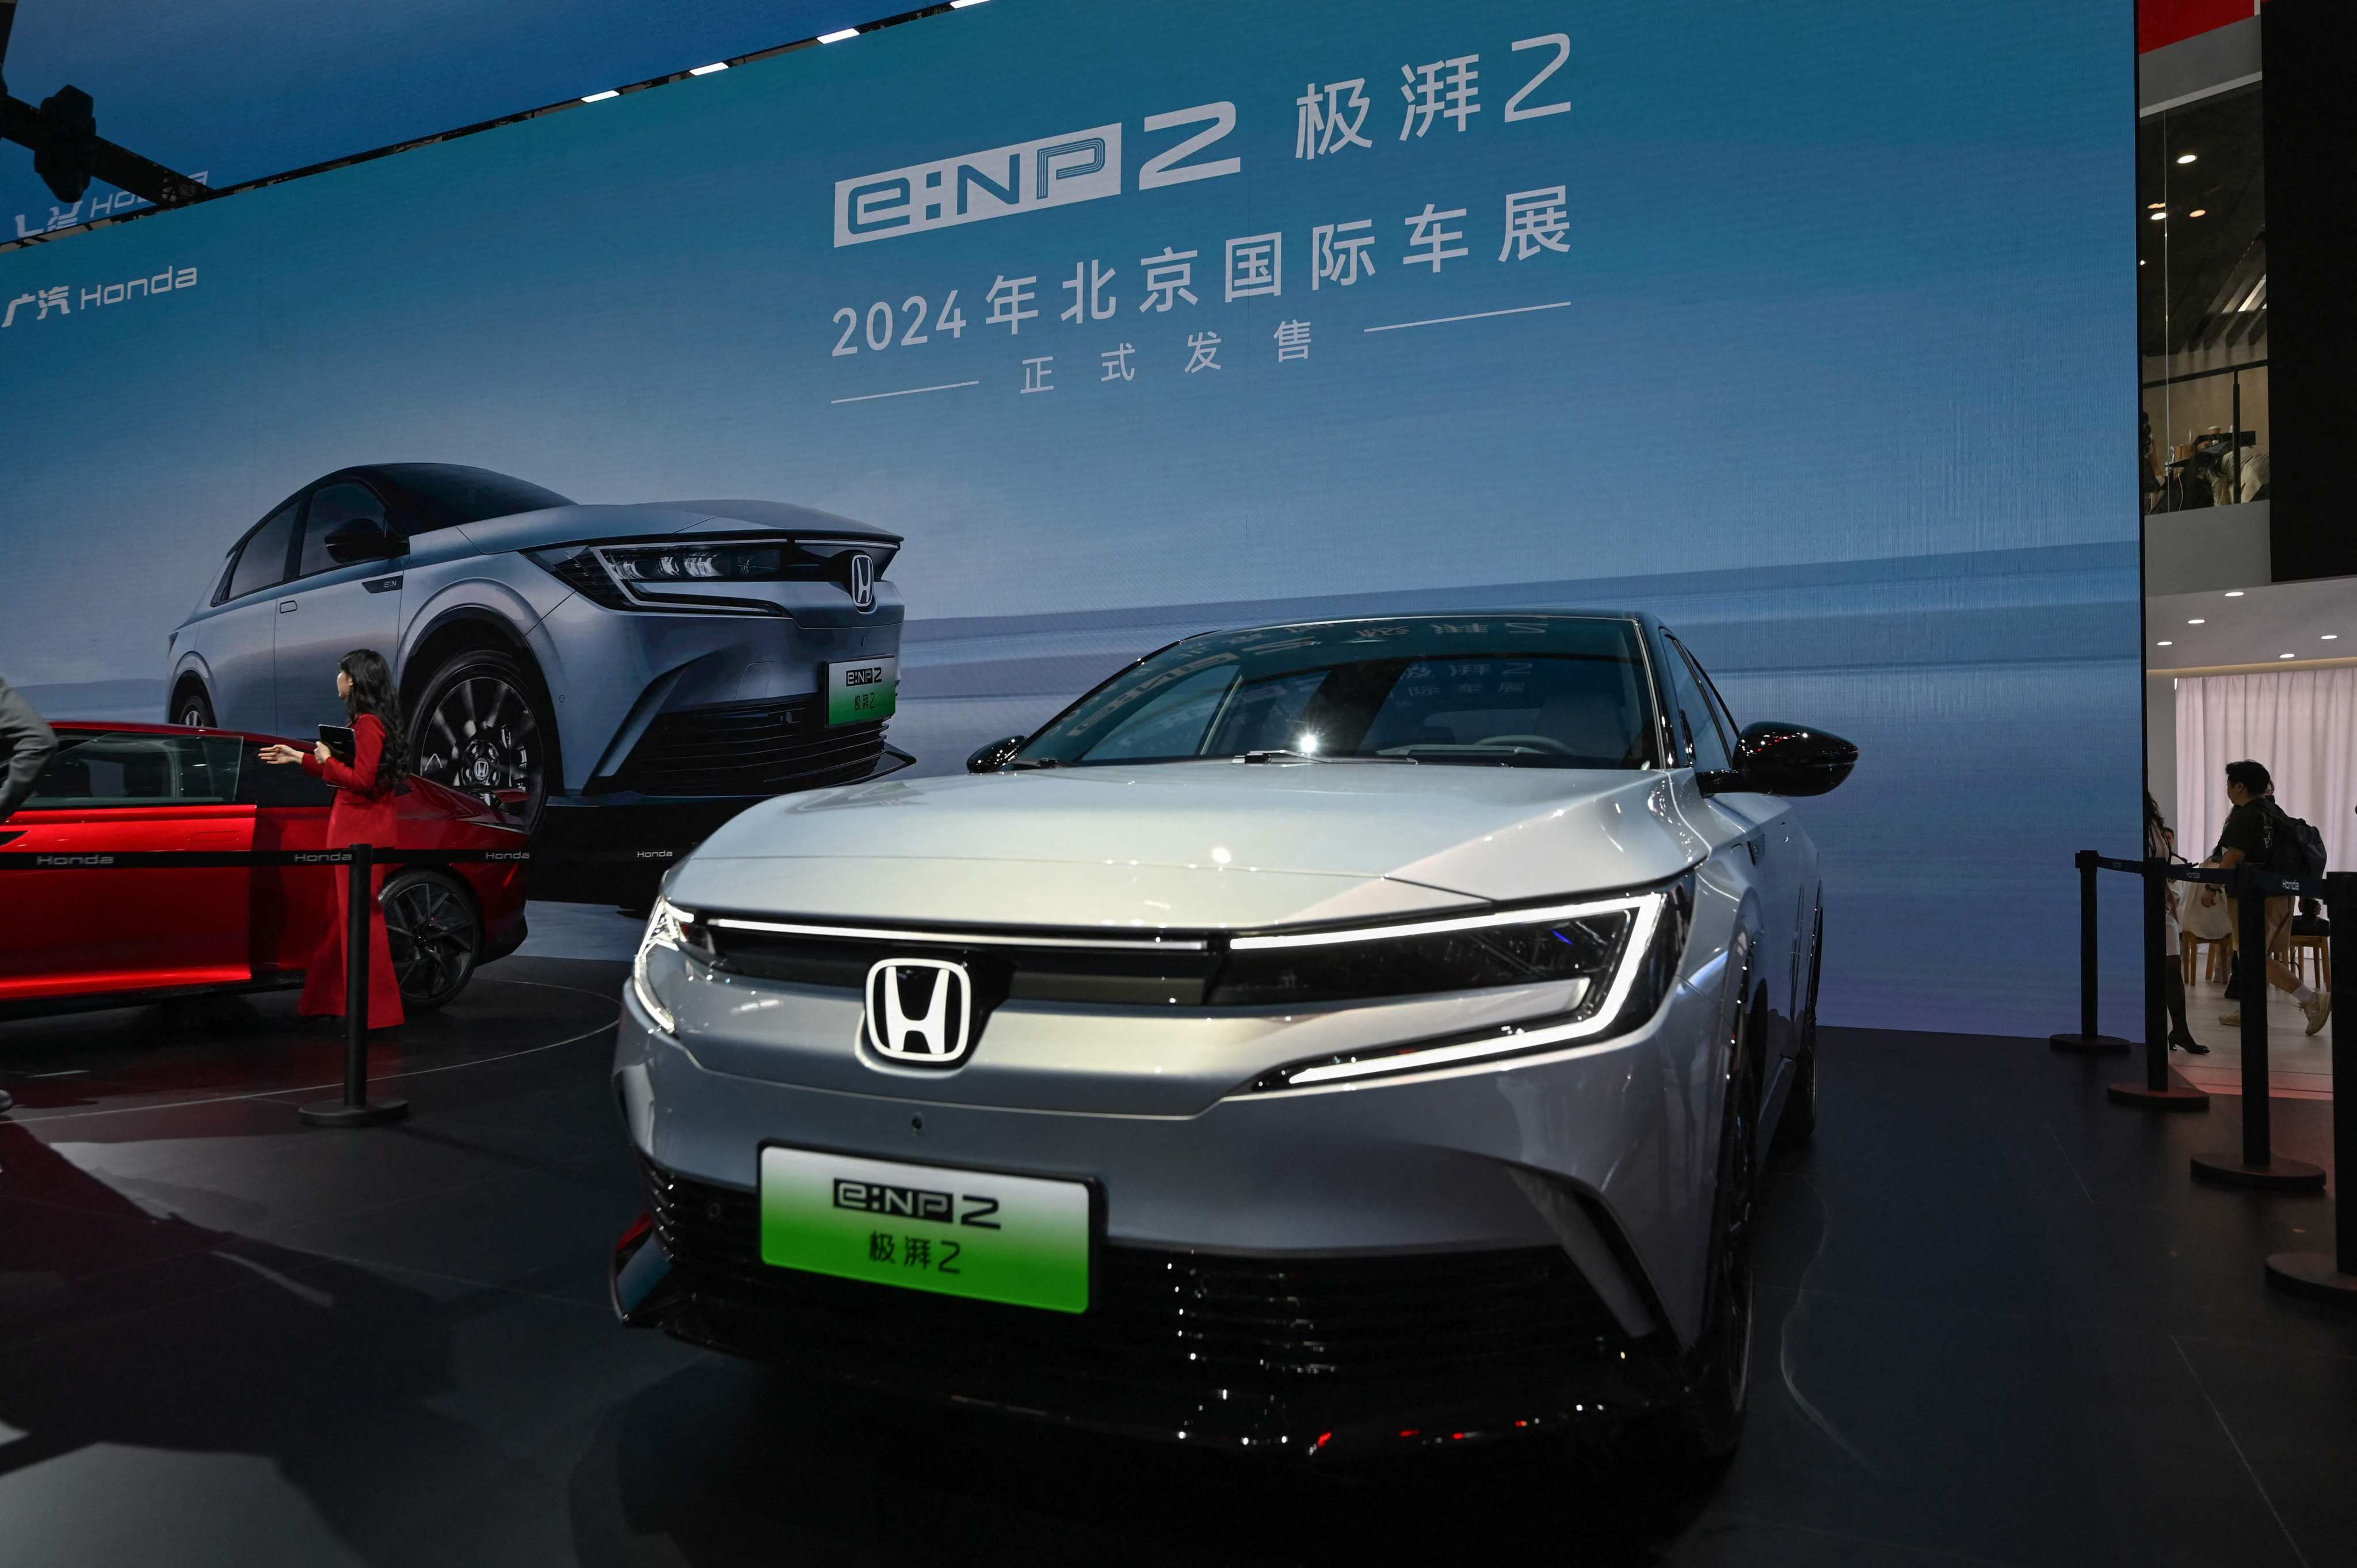 A Honda e:NP2 electric SUV on display at the Beijing Auto Show on April 25, 2024. Photo: AFP